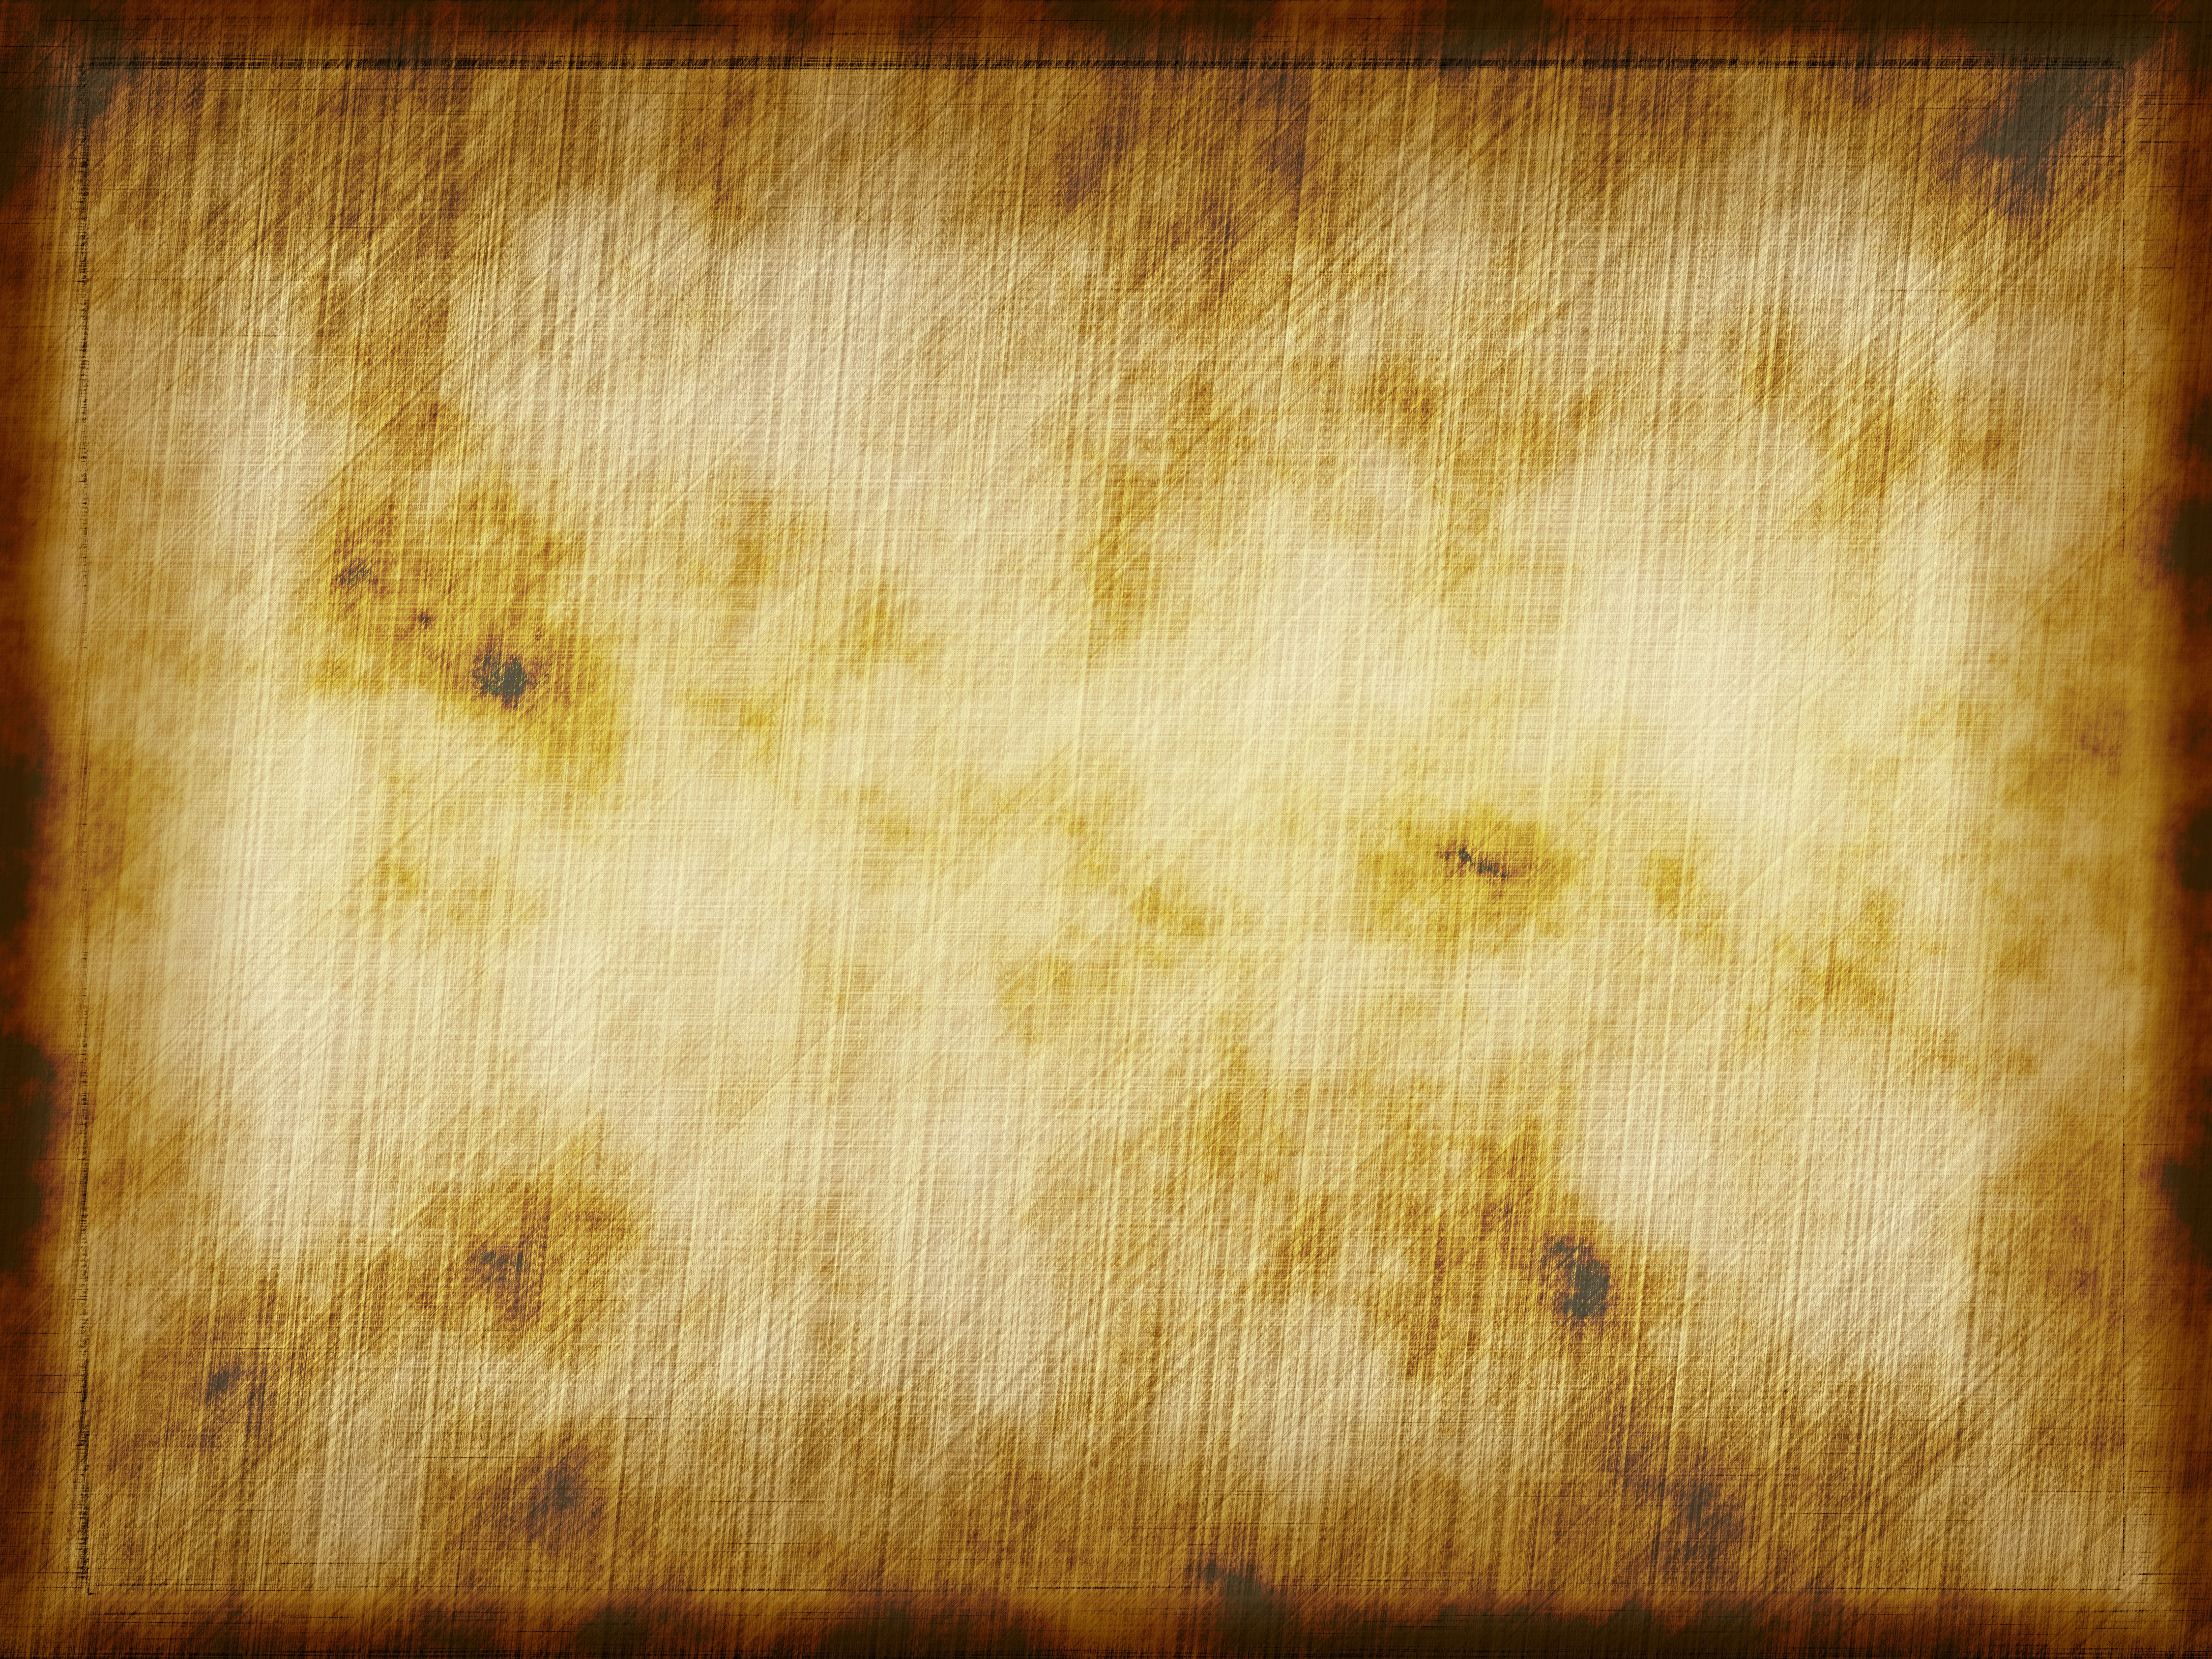 Old worn out parchment paper texture or background Stock Photo - Alamy